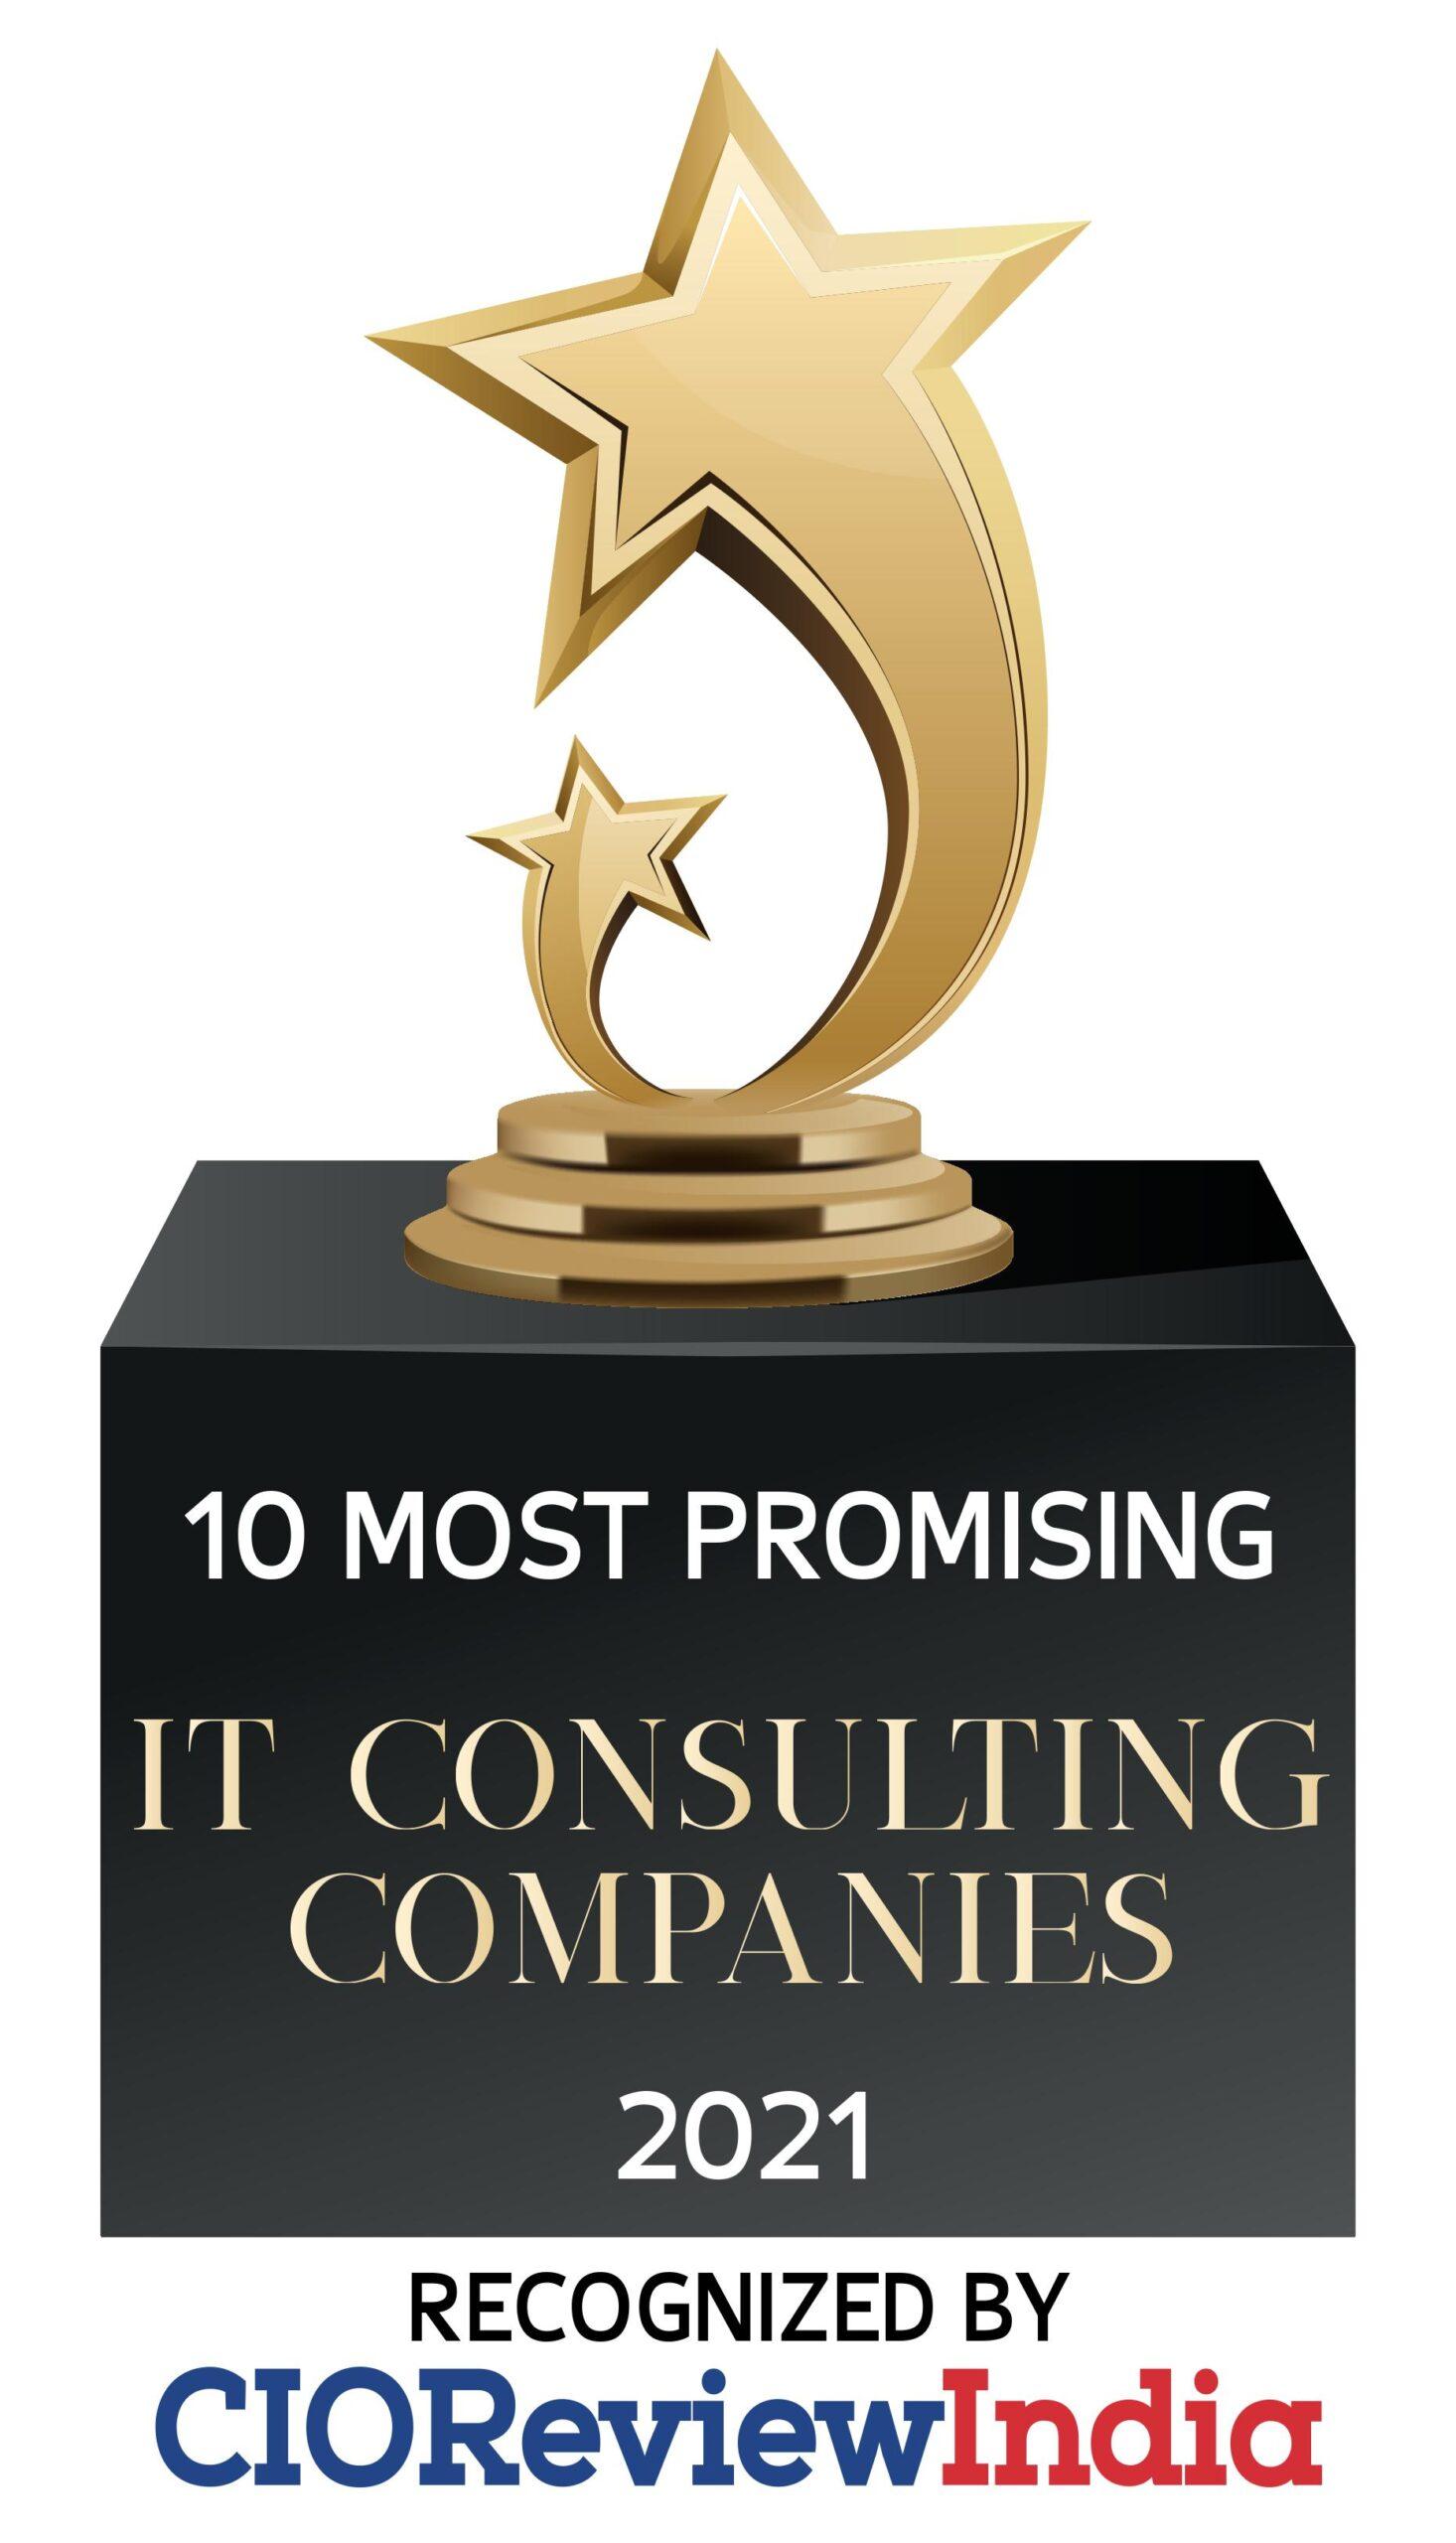 10 Most Promising IT Consulting Companies 2021 Recognized by CIOReviewIndia - Award received by 7 dot 2 IT Consulting